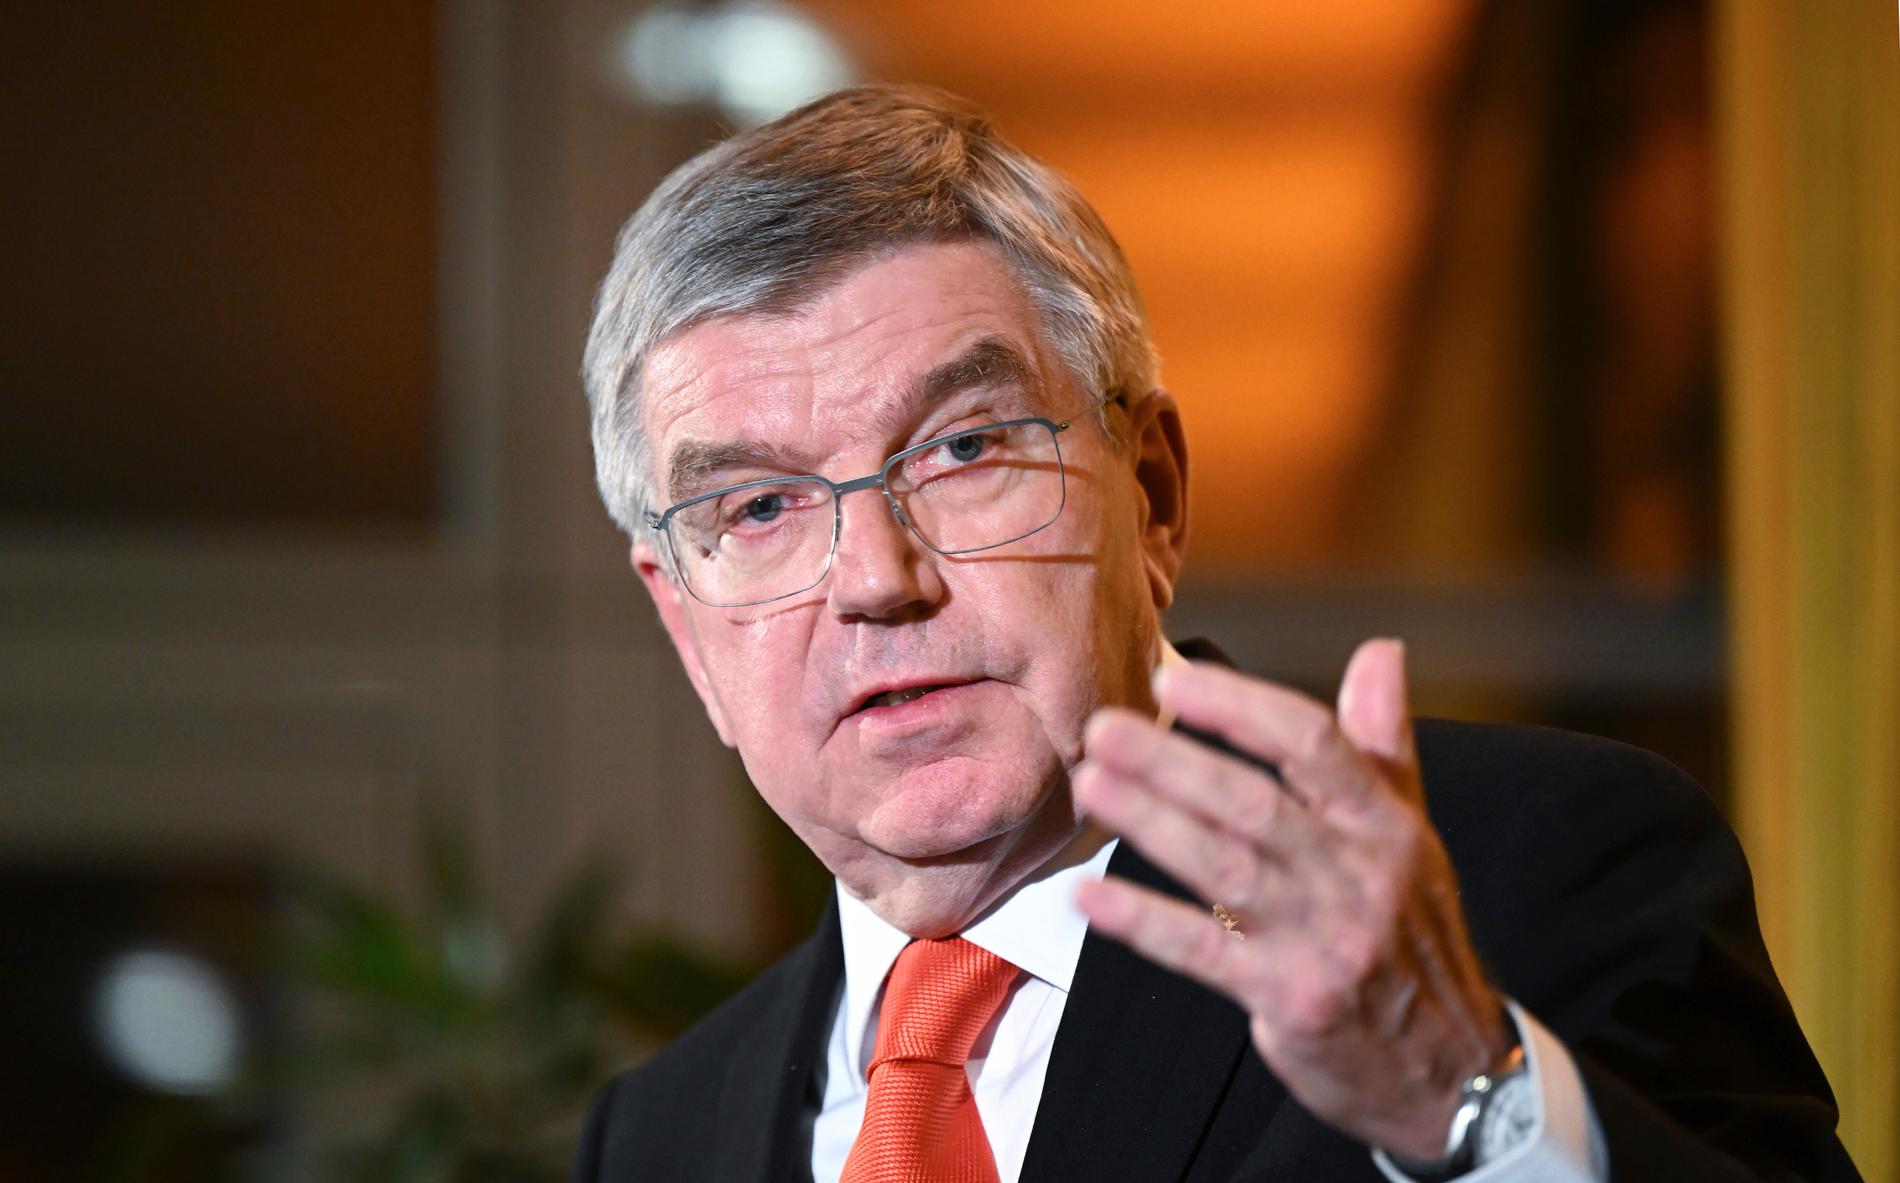 Thomas Bach, president of the International Olympic Committee, is sounding the alarm about grim weather forecasts